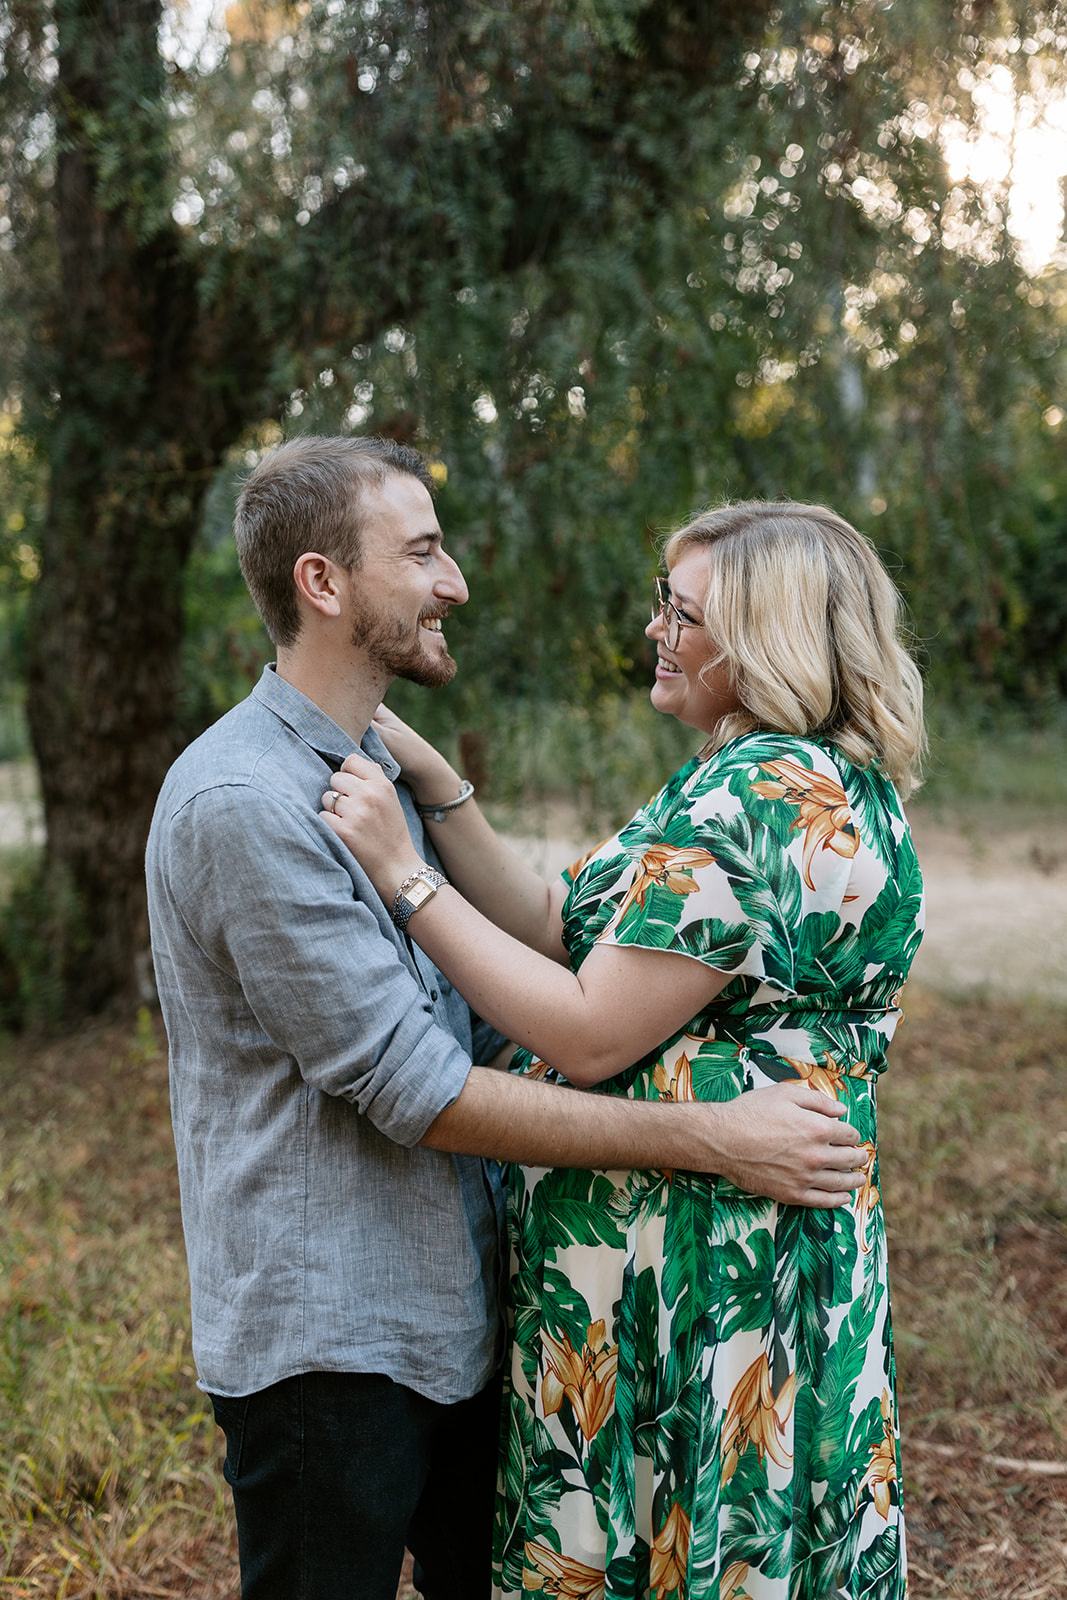 hiltscher park fullerton california engagement session northern california photographer orange county photography